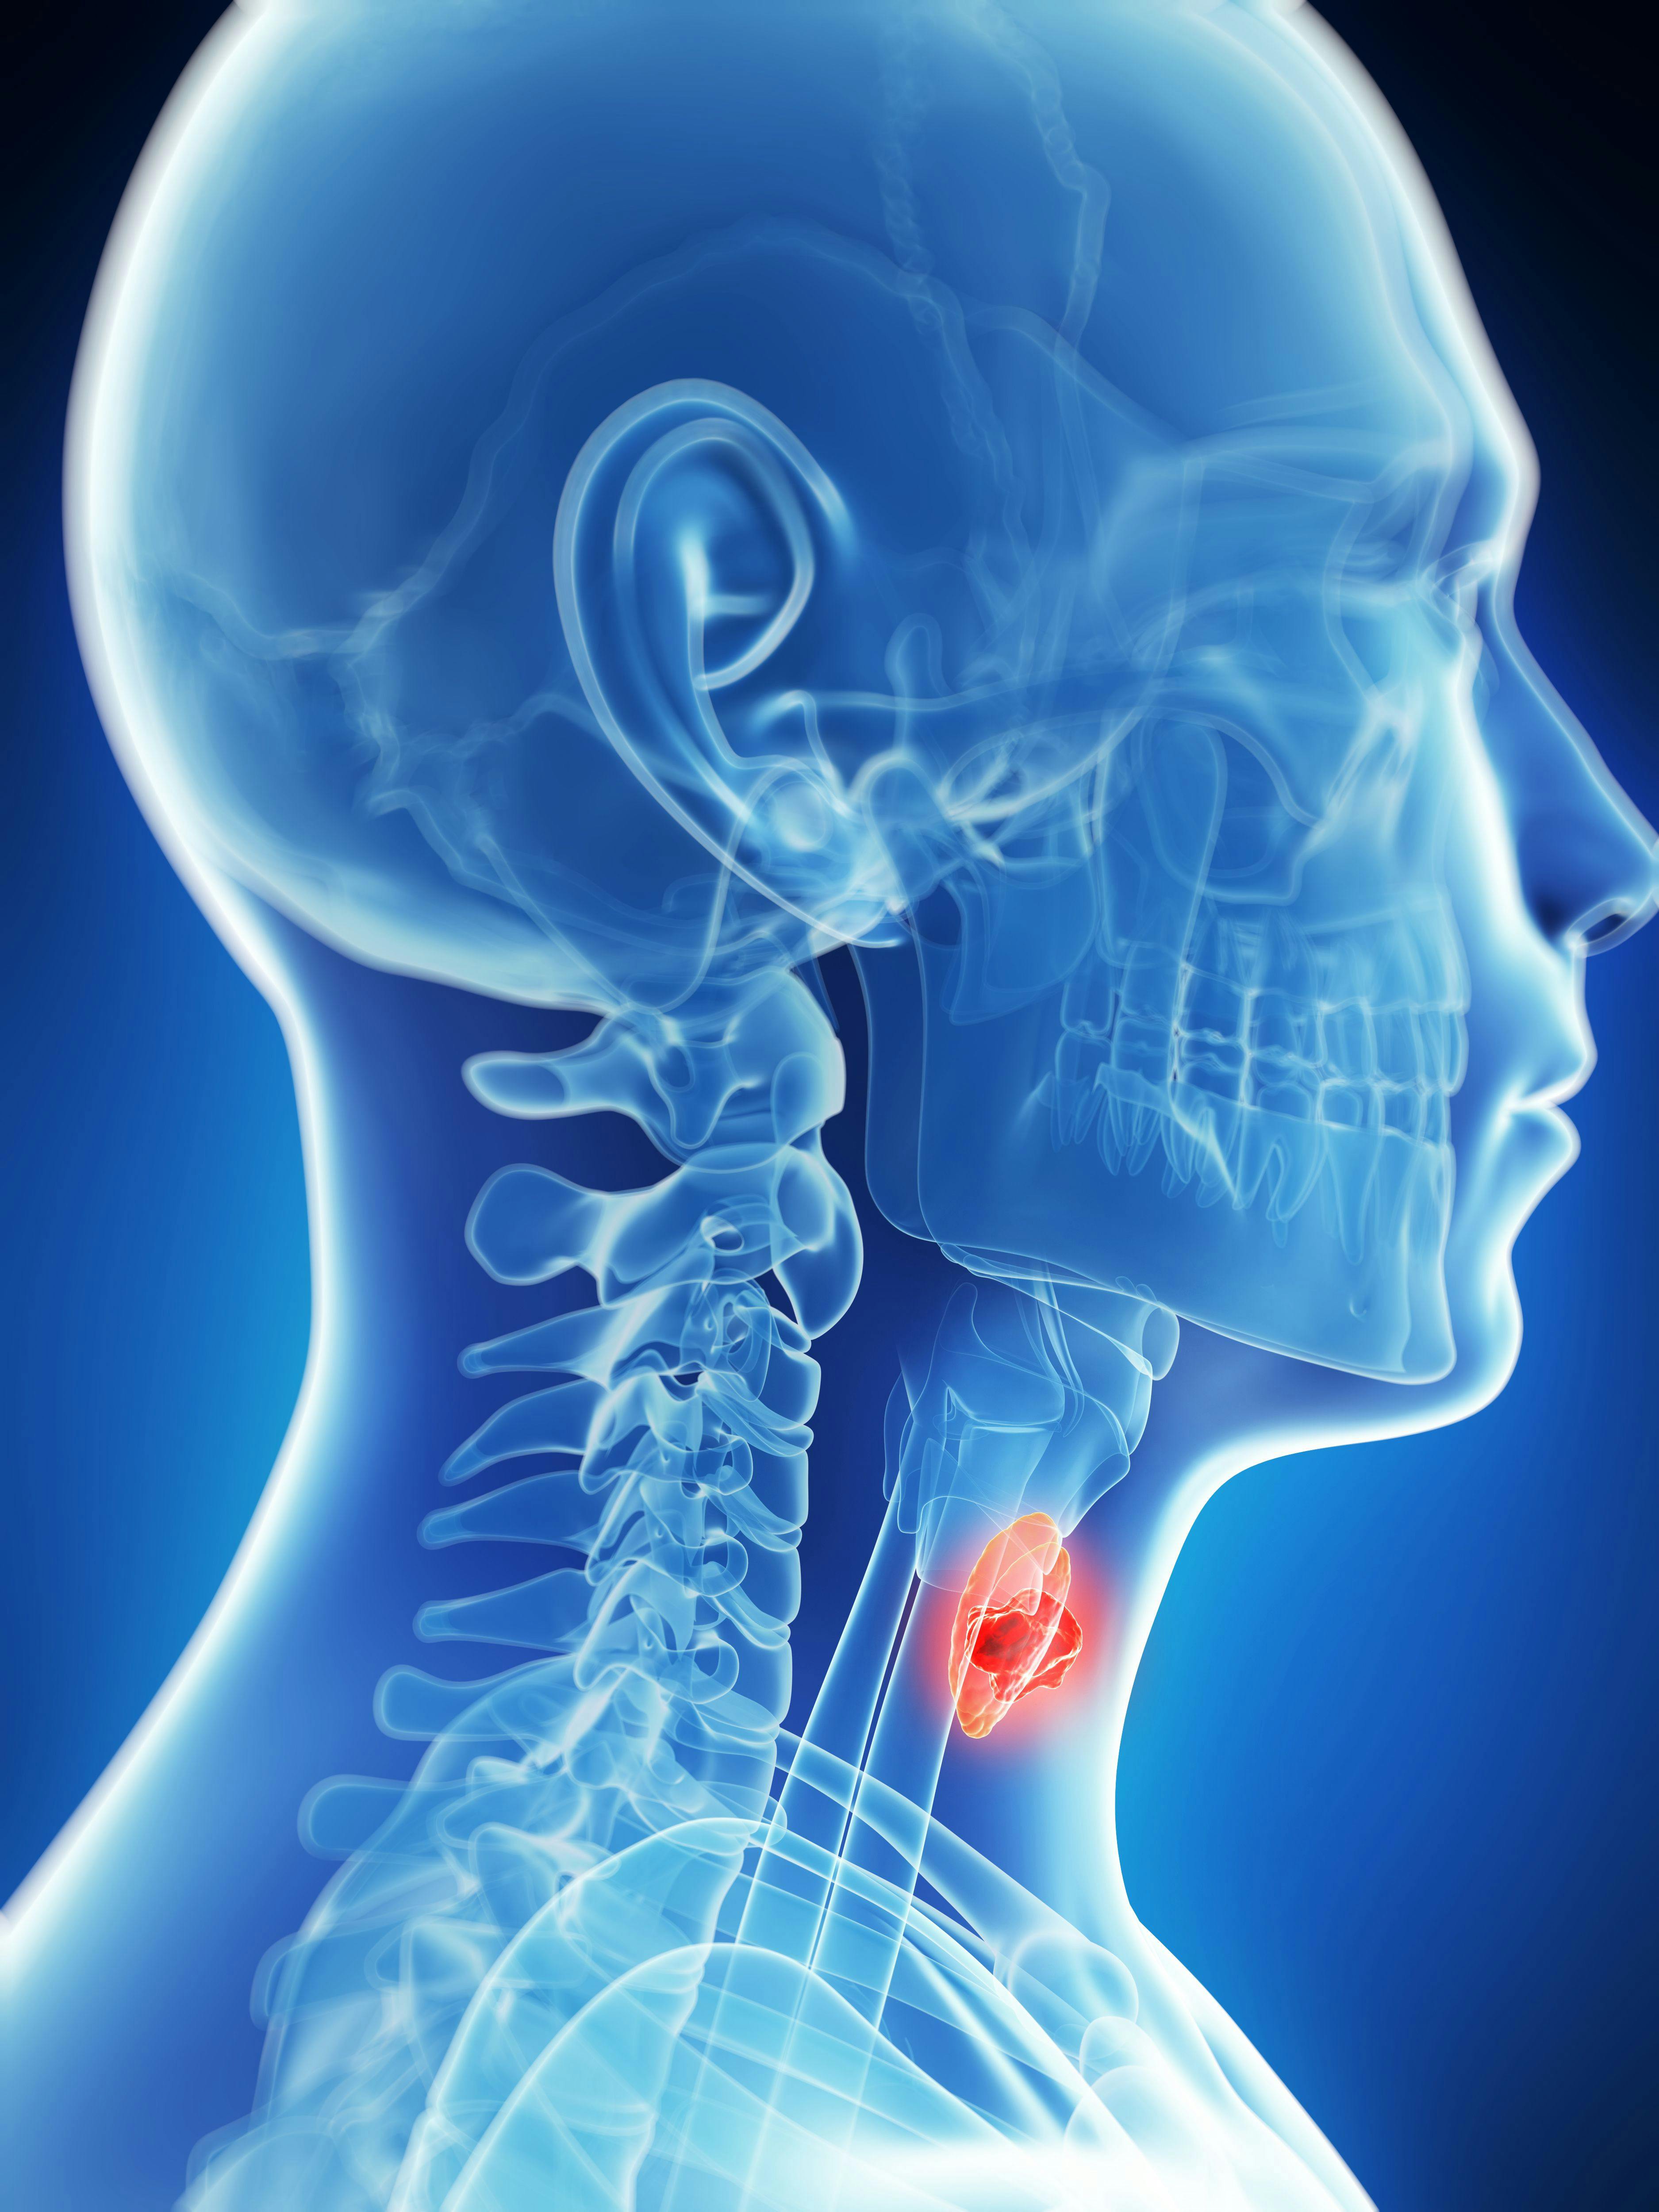 Sintilimab plus chemoradiotherapy produces a higher 3-year distant metastasis-free survival rate vs chemoradiotherapy alone among patients with advanced nasopharyngeal carcinoma in the phase 3 CONTINUUM trial.